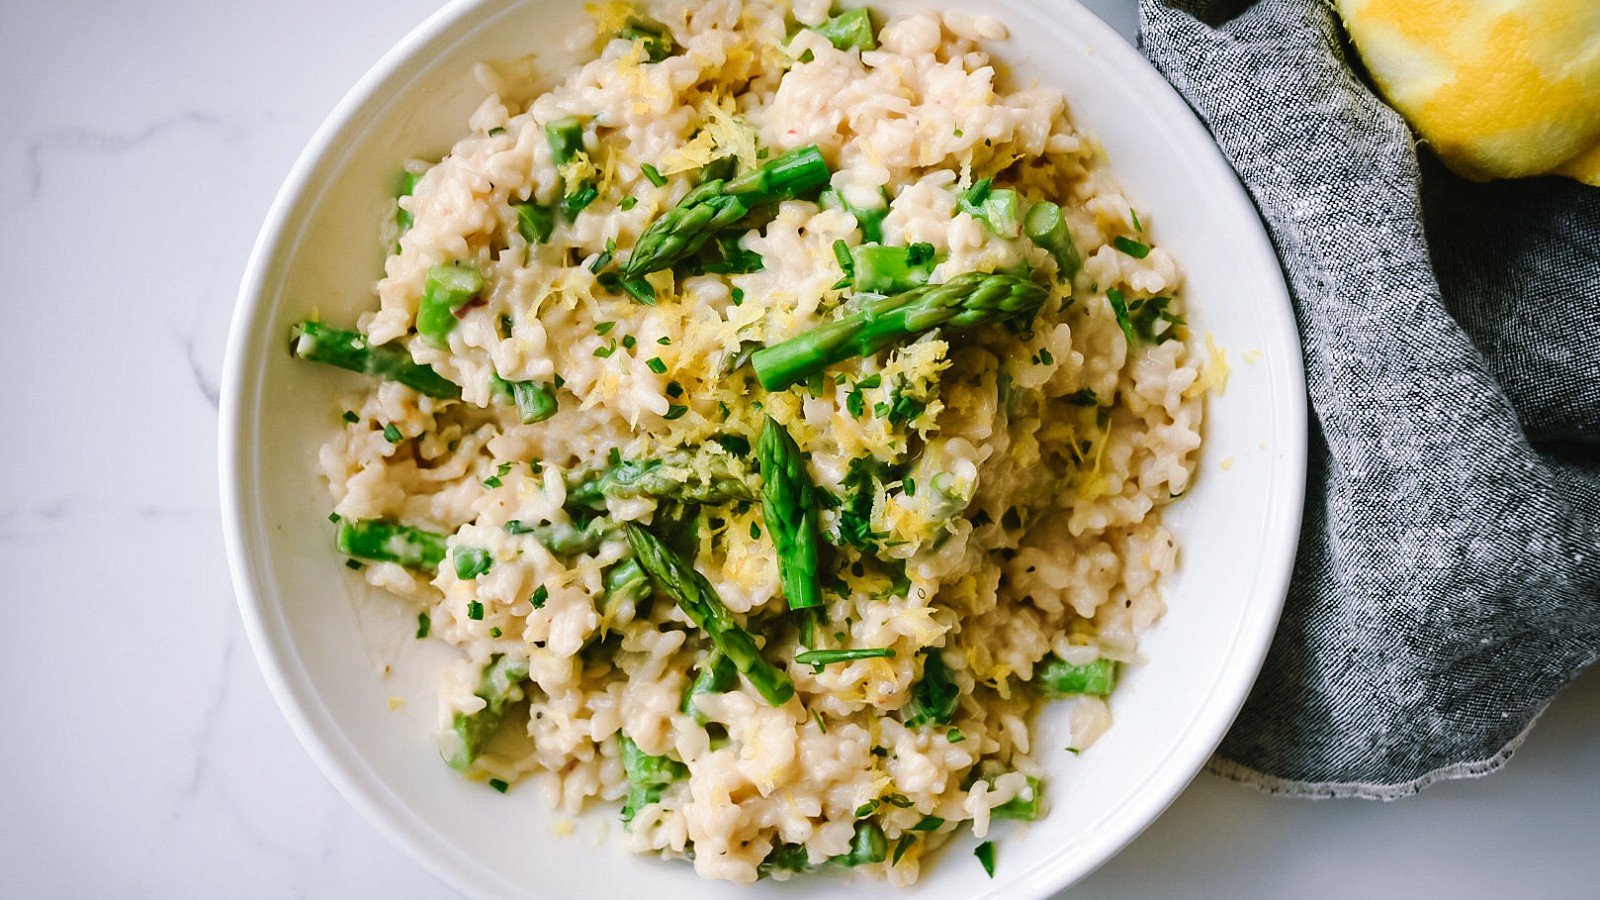 Image of Asparagus and Parmesan Risotto with No Salt Lemon Pepper